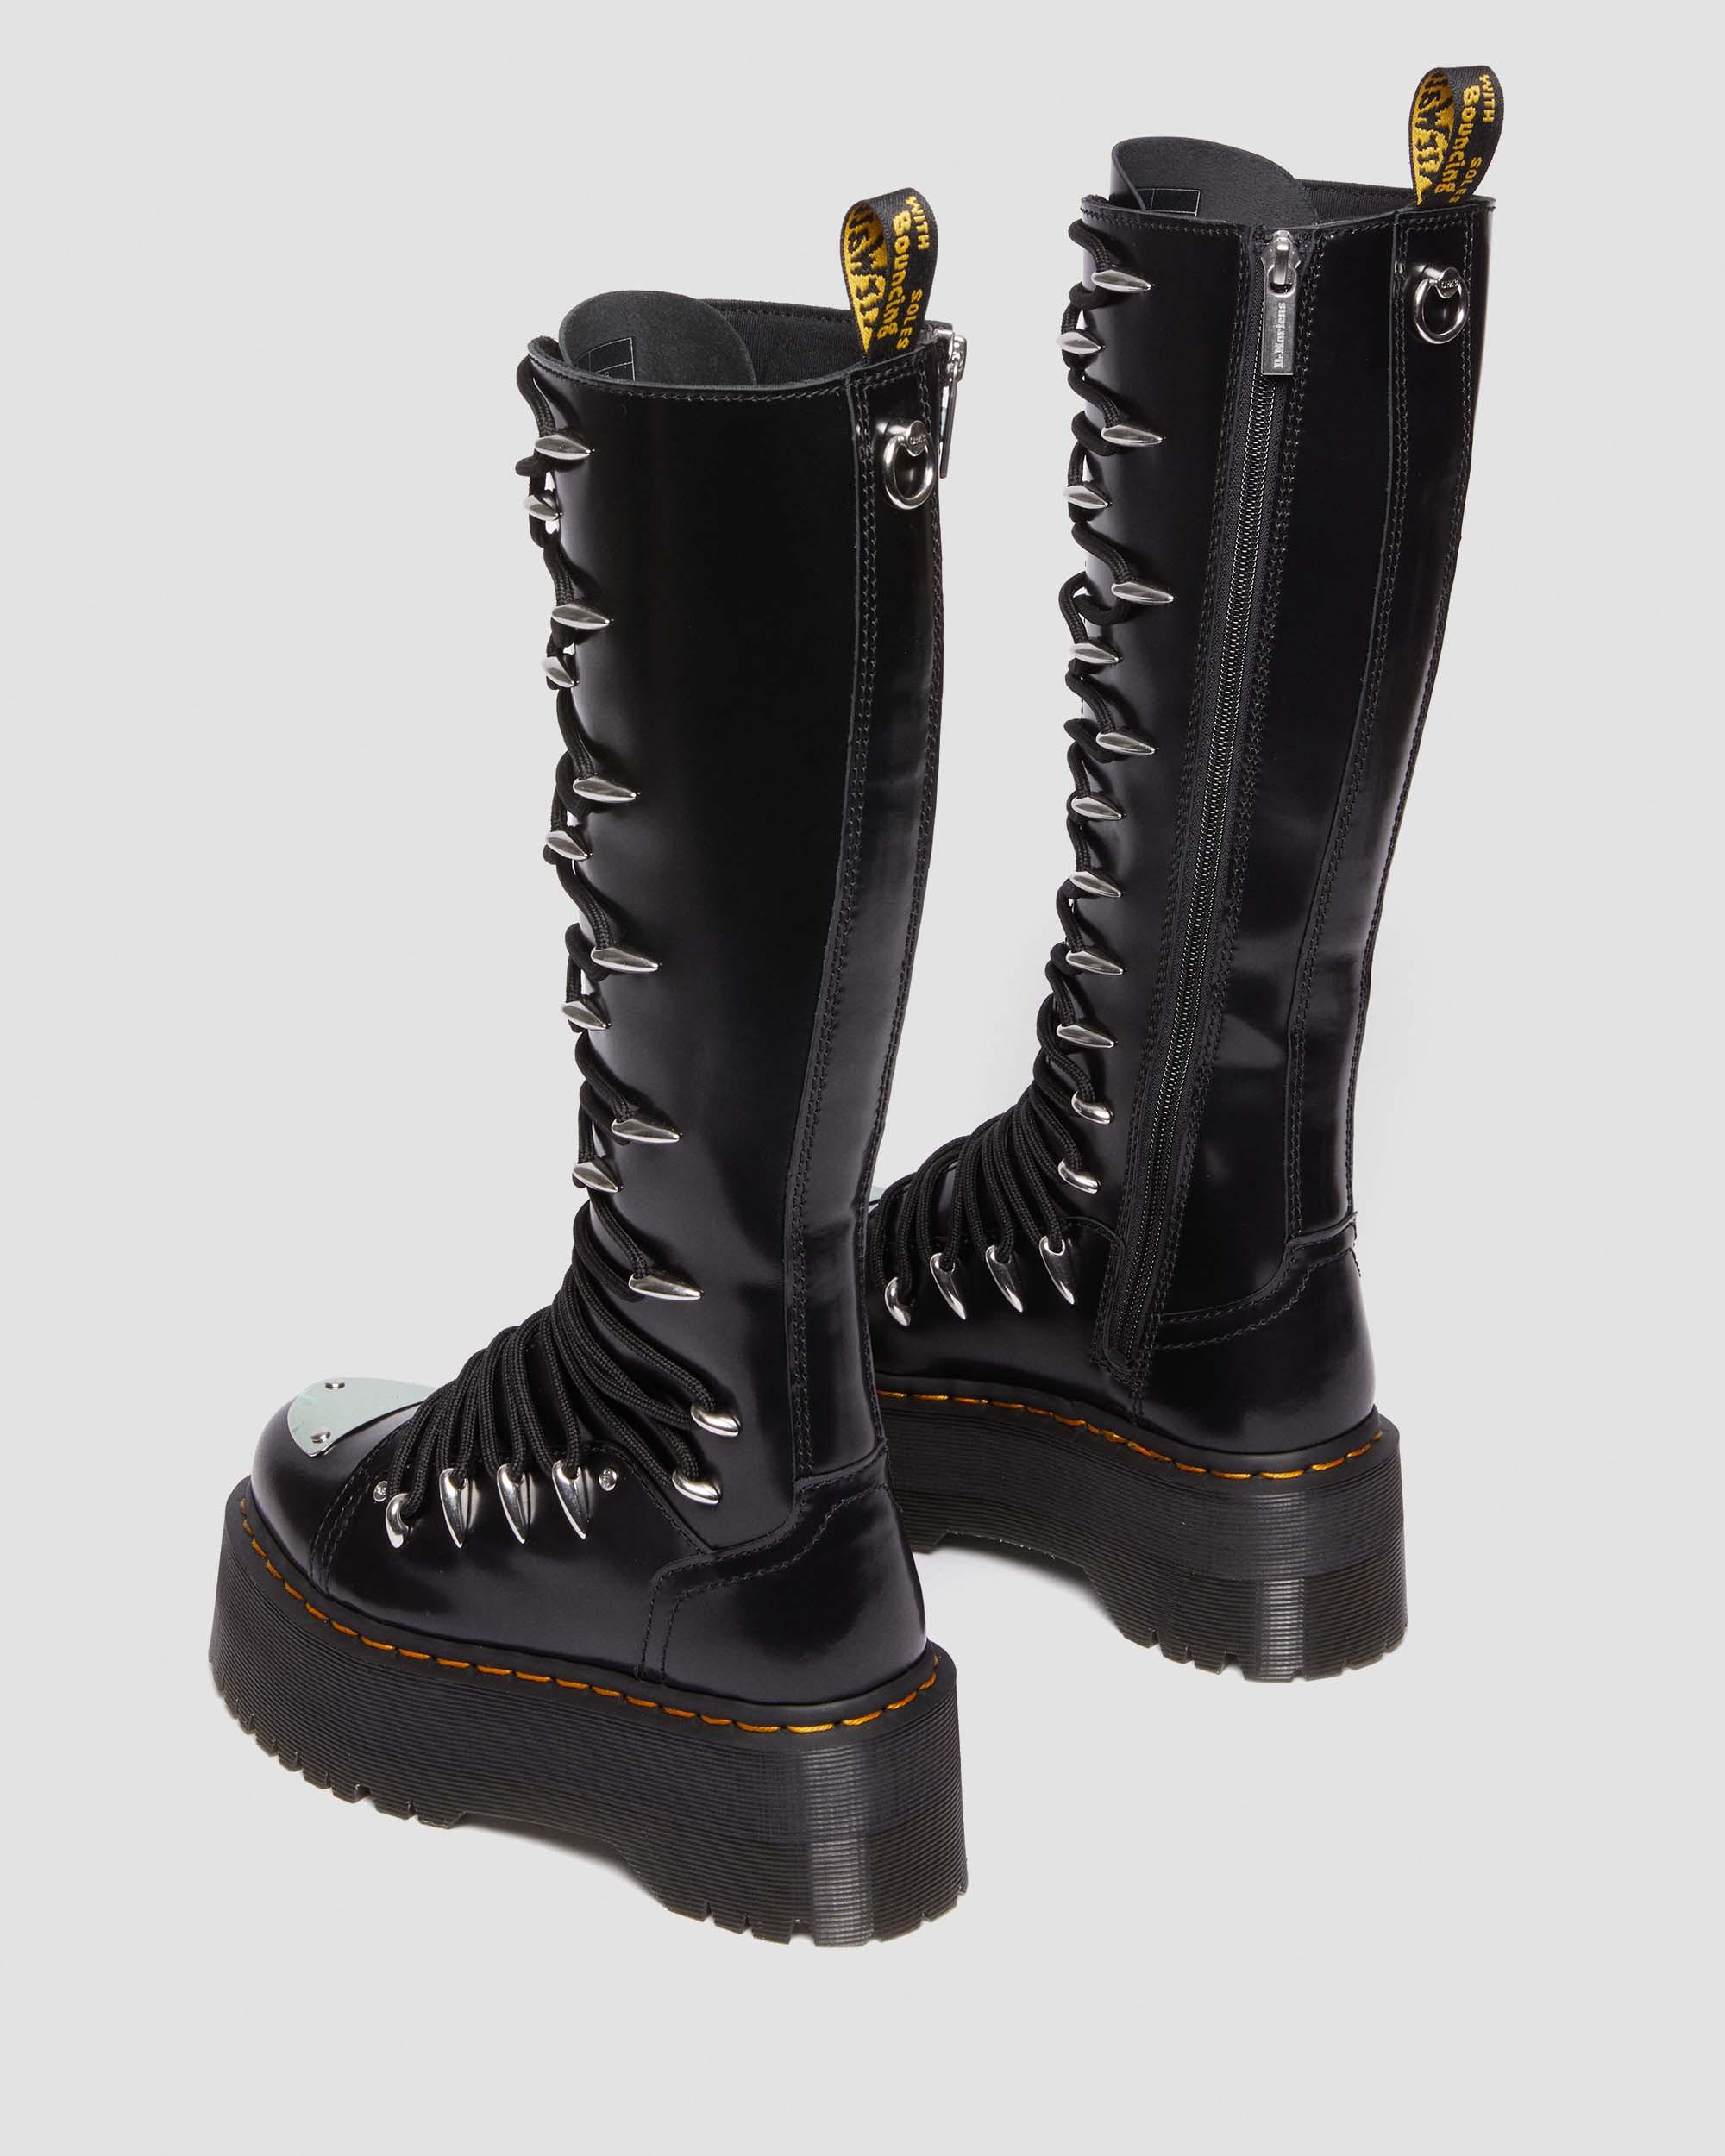 1B60 Max Lace Up Knee High Platform Boots in Black